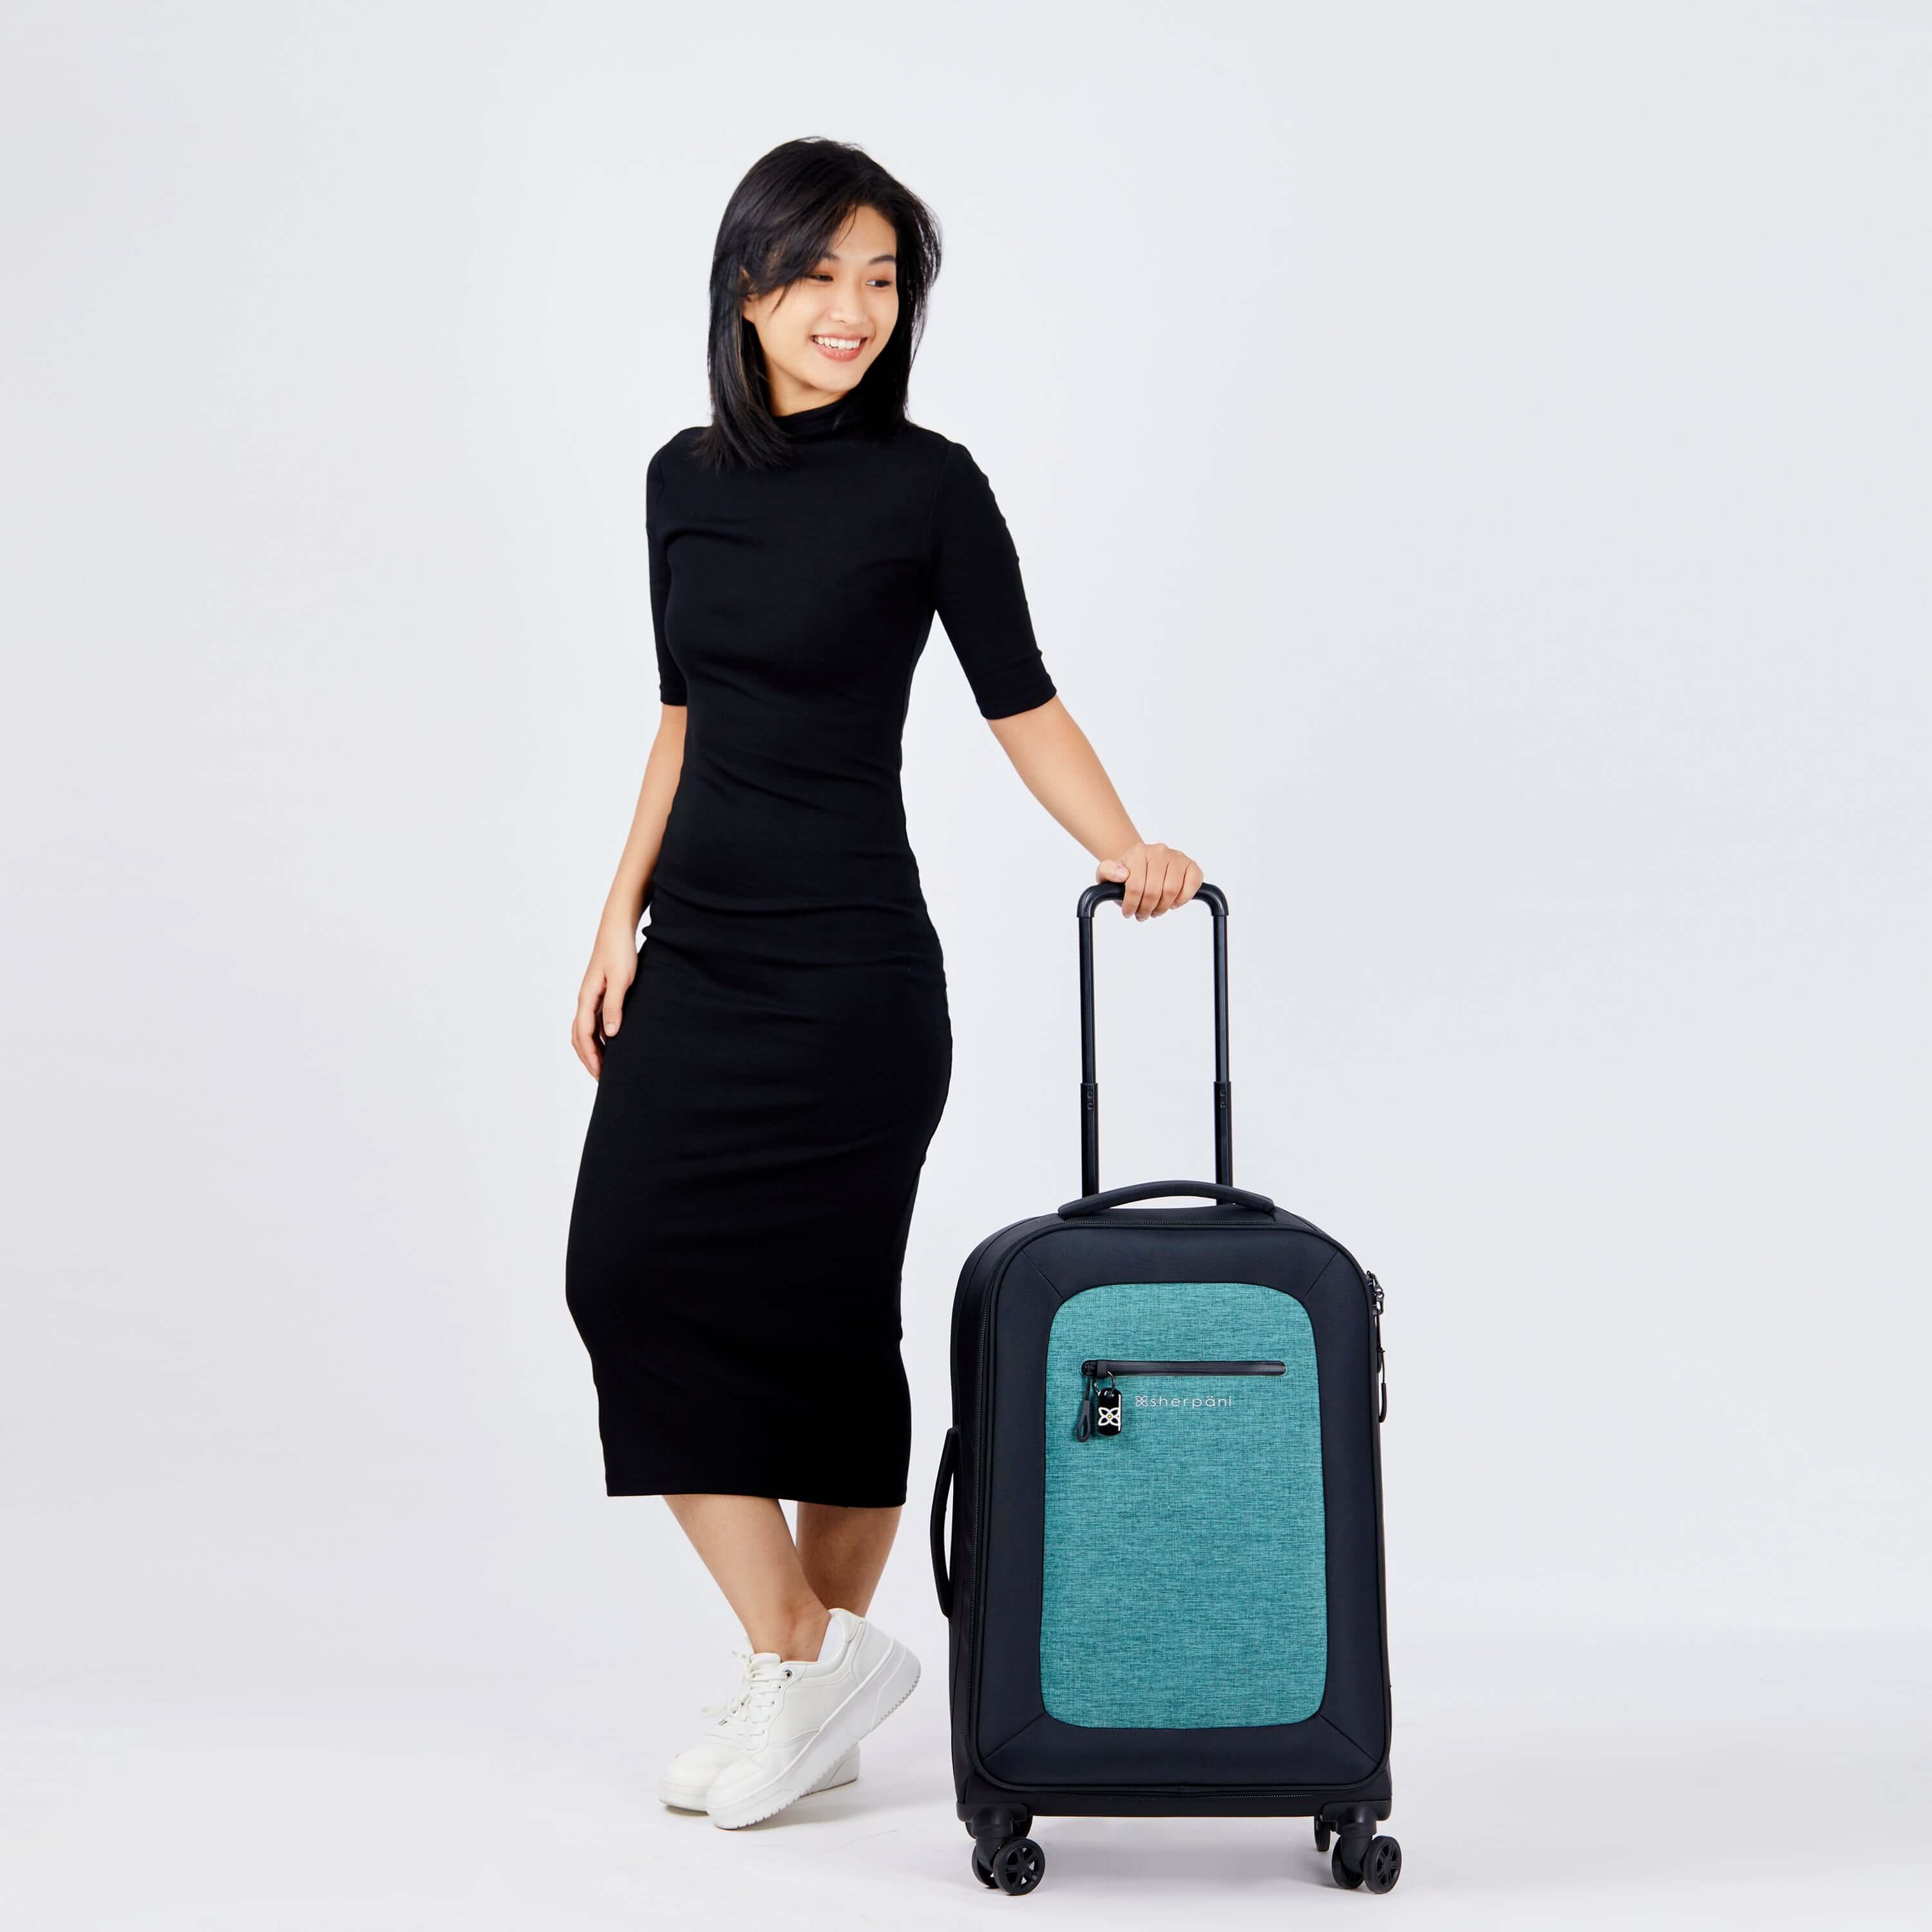 Full body view of a dark haired model smiling over her left shoulder. She wears a black dress and white sneakers. She is holding the retractable handle of Sherpani's Anti-Theft luggage, the Hemisphere in Teal, which stands next to her. 